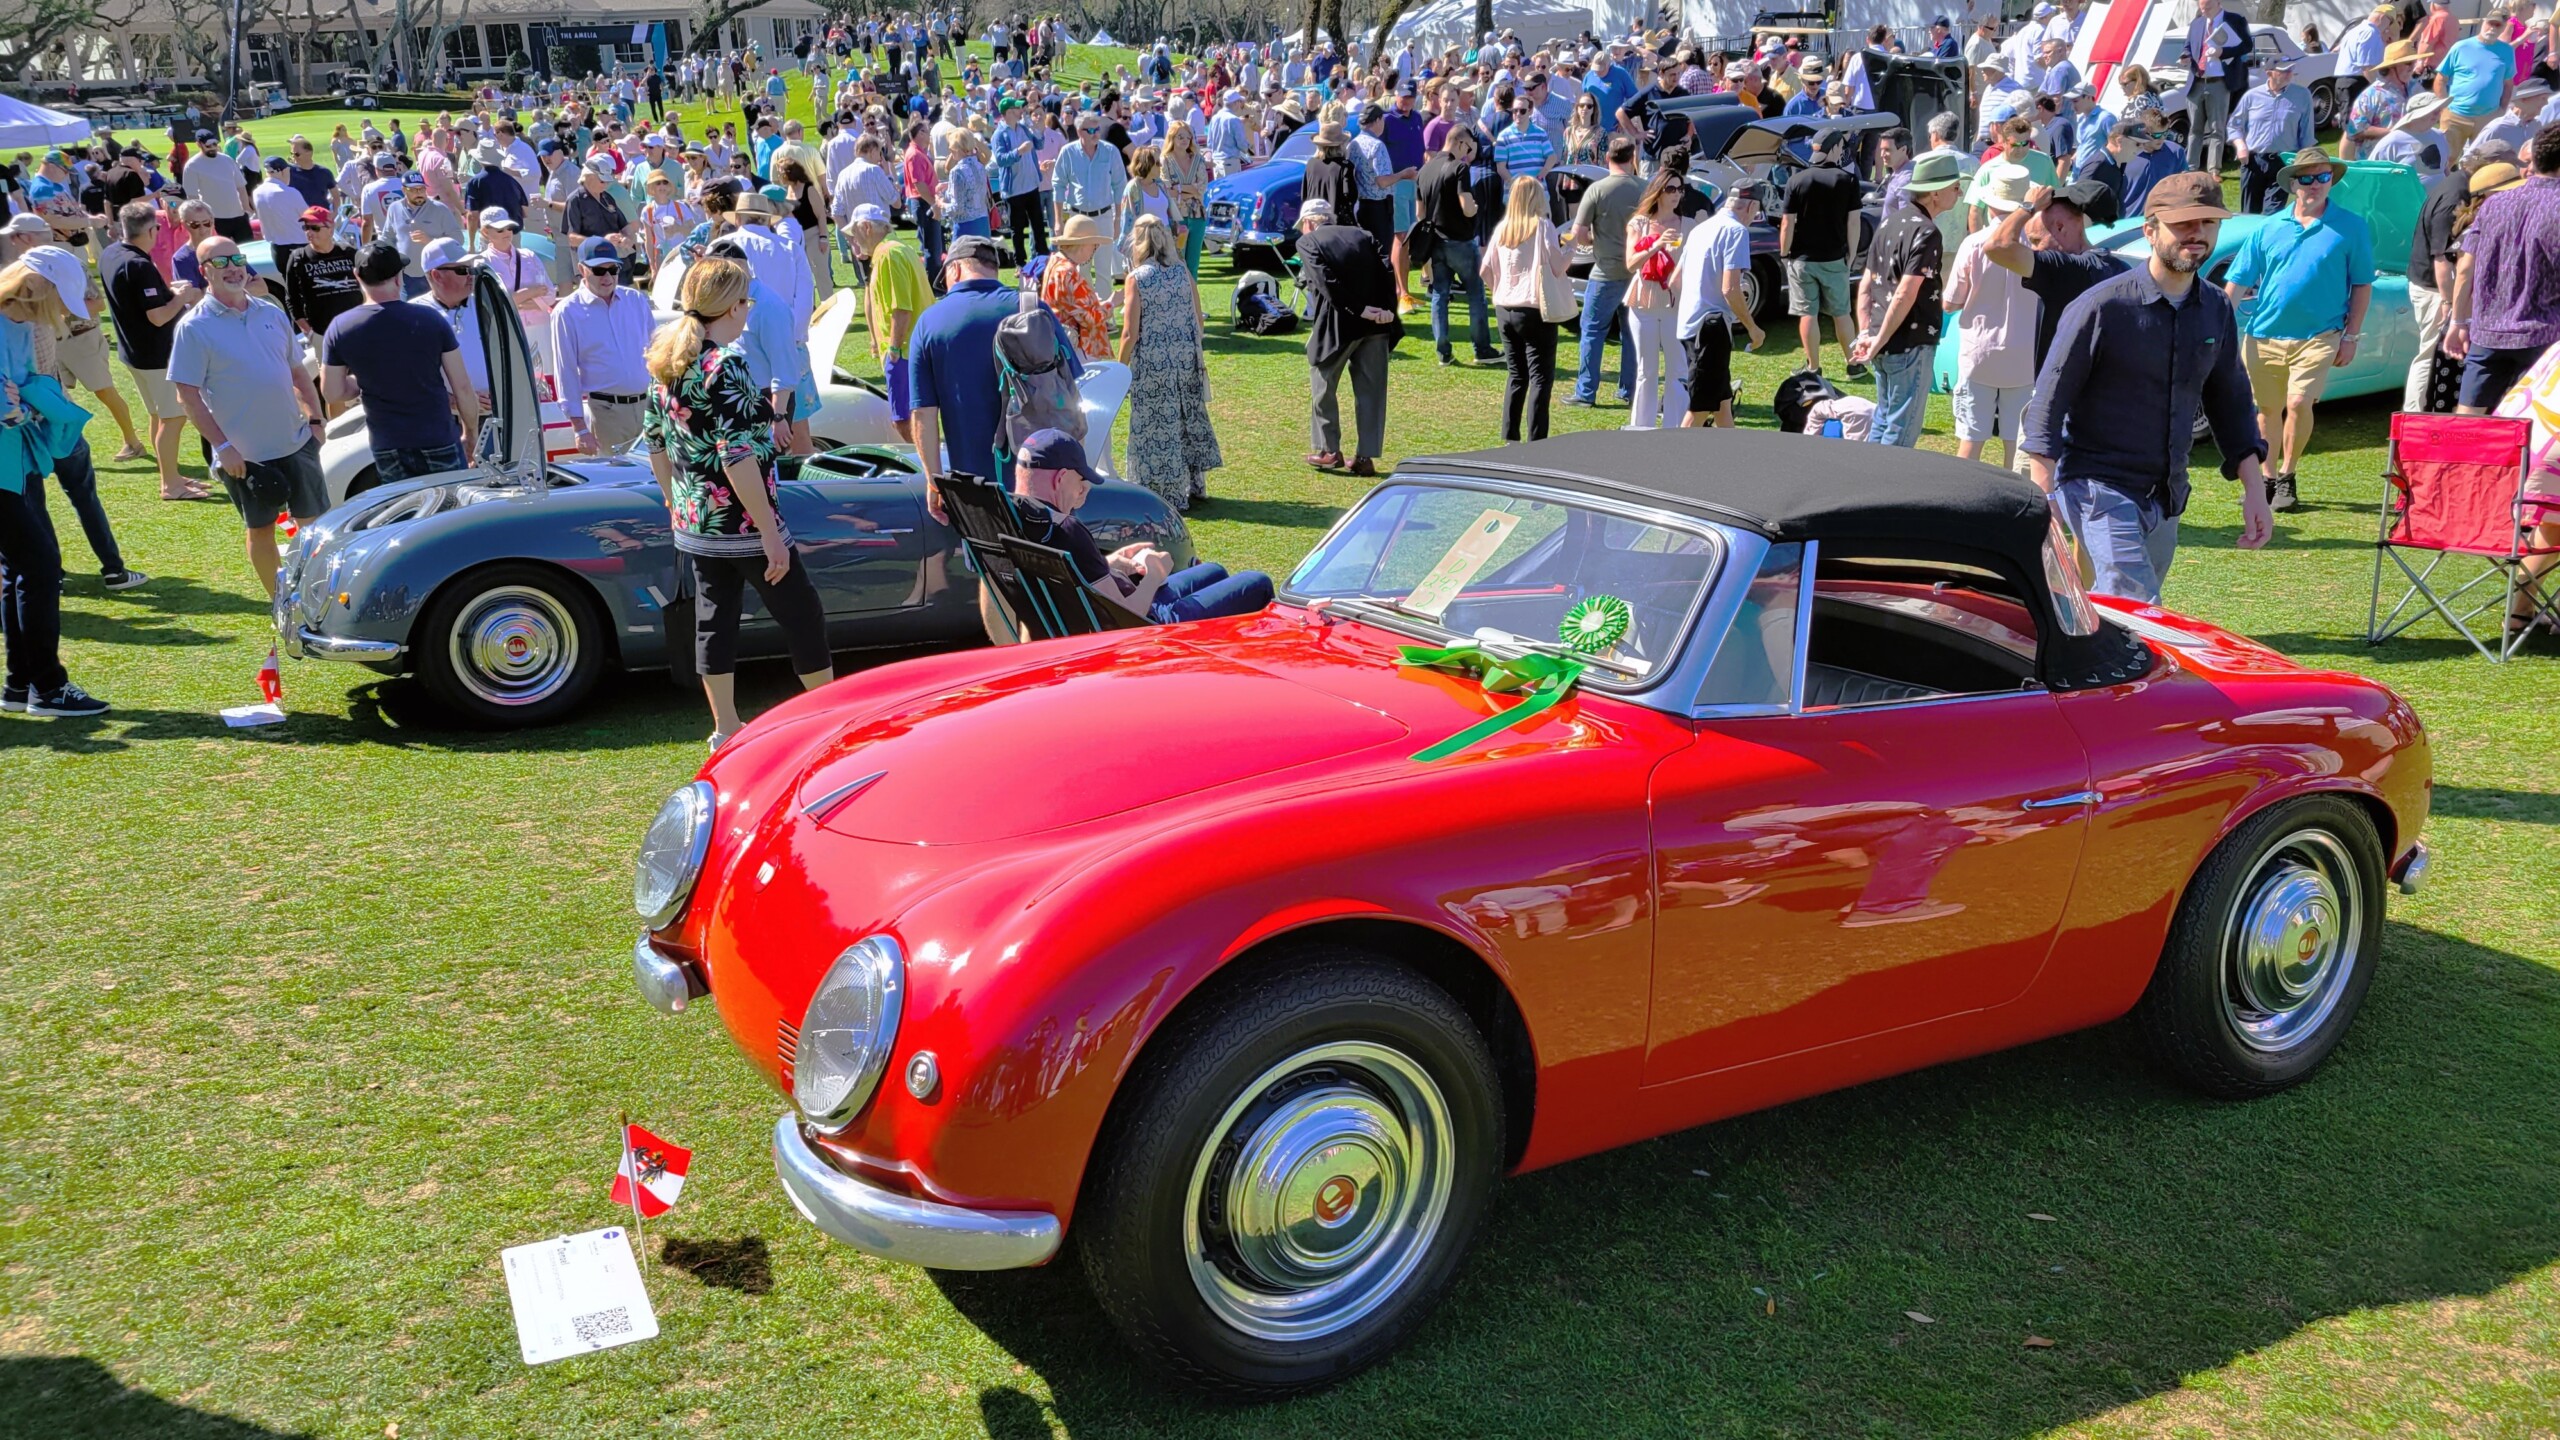 Some of the thousands of fans who flocked to The Amelia concours d'Elegance check out a row of rare Denzel sports cars built in Austria. | Dan Scanlan, WJCT News 89.9